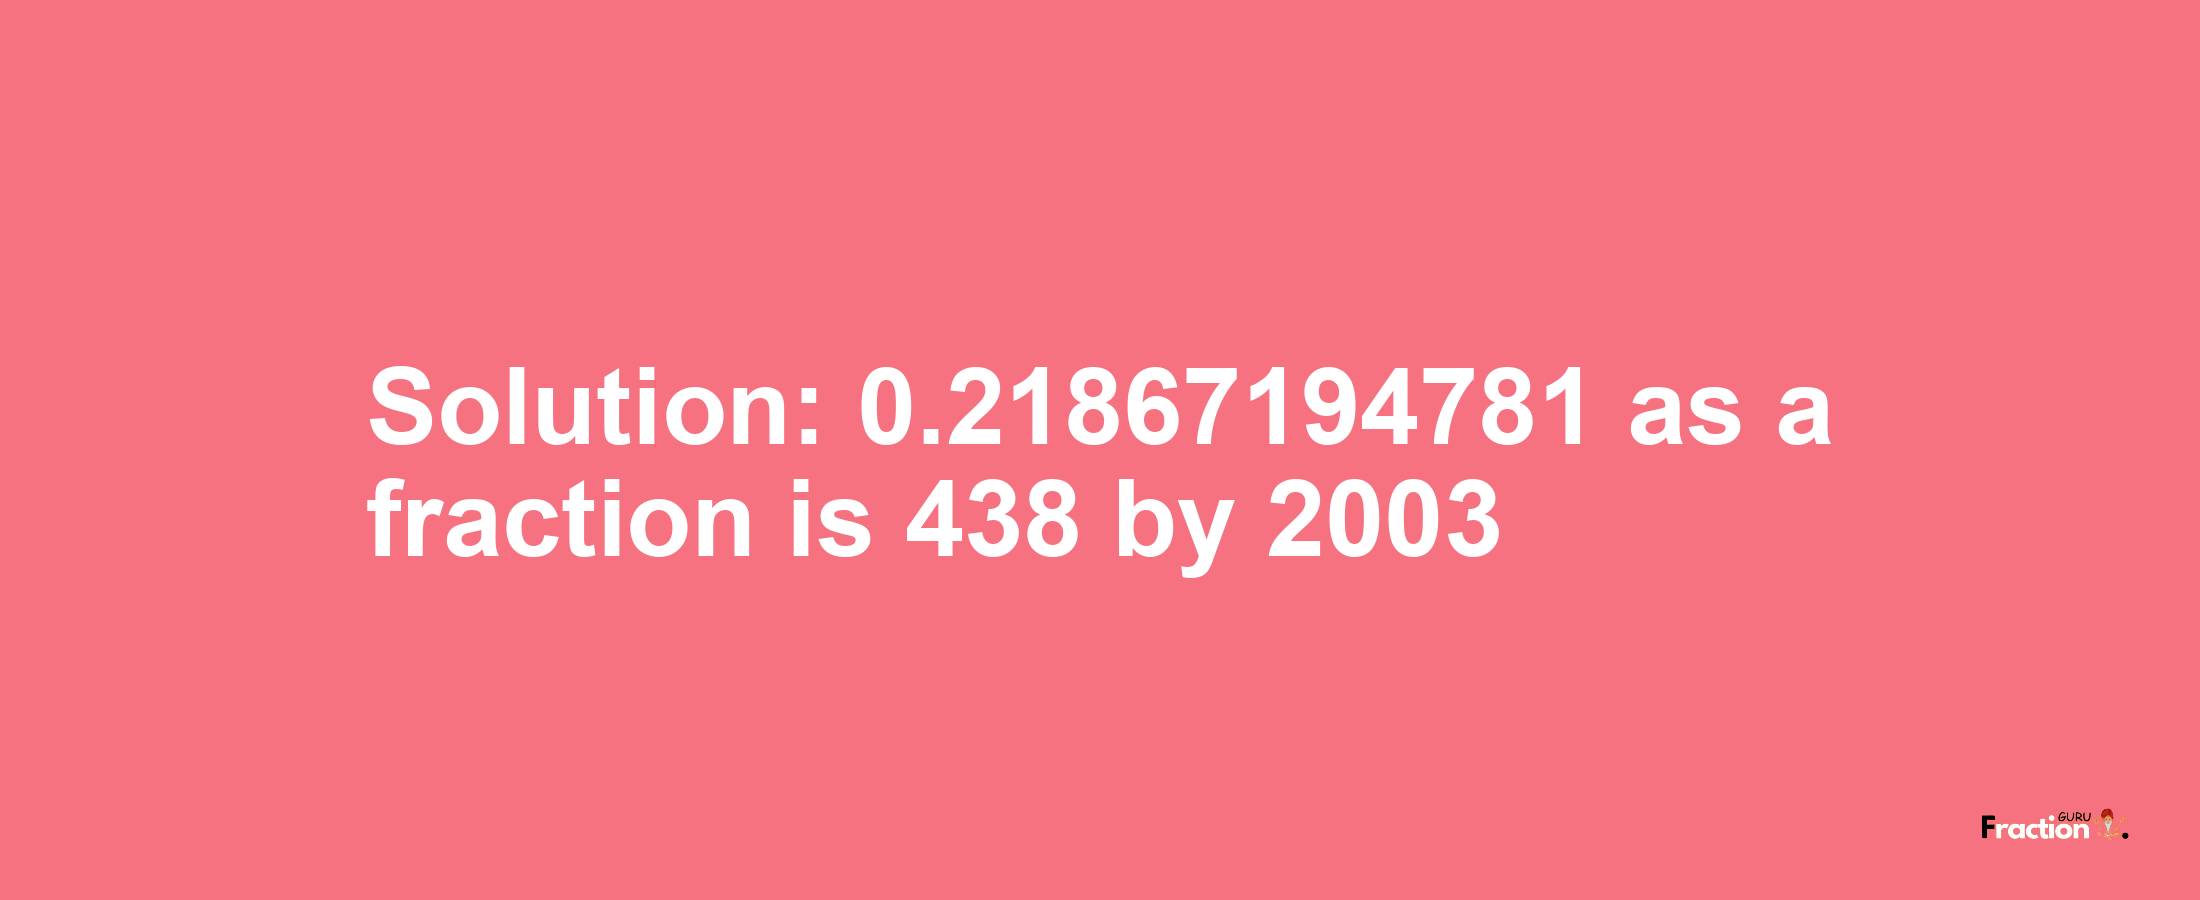 Solution:0.21867194781 as a fraction is 438/2003